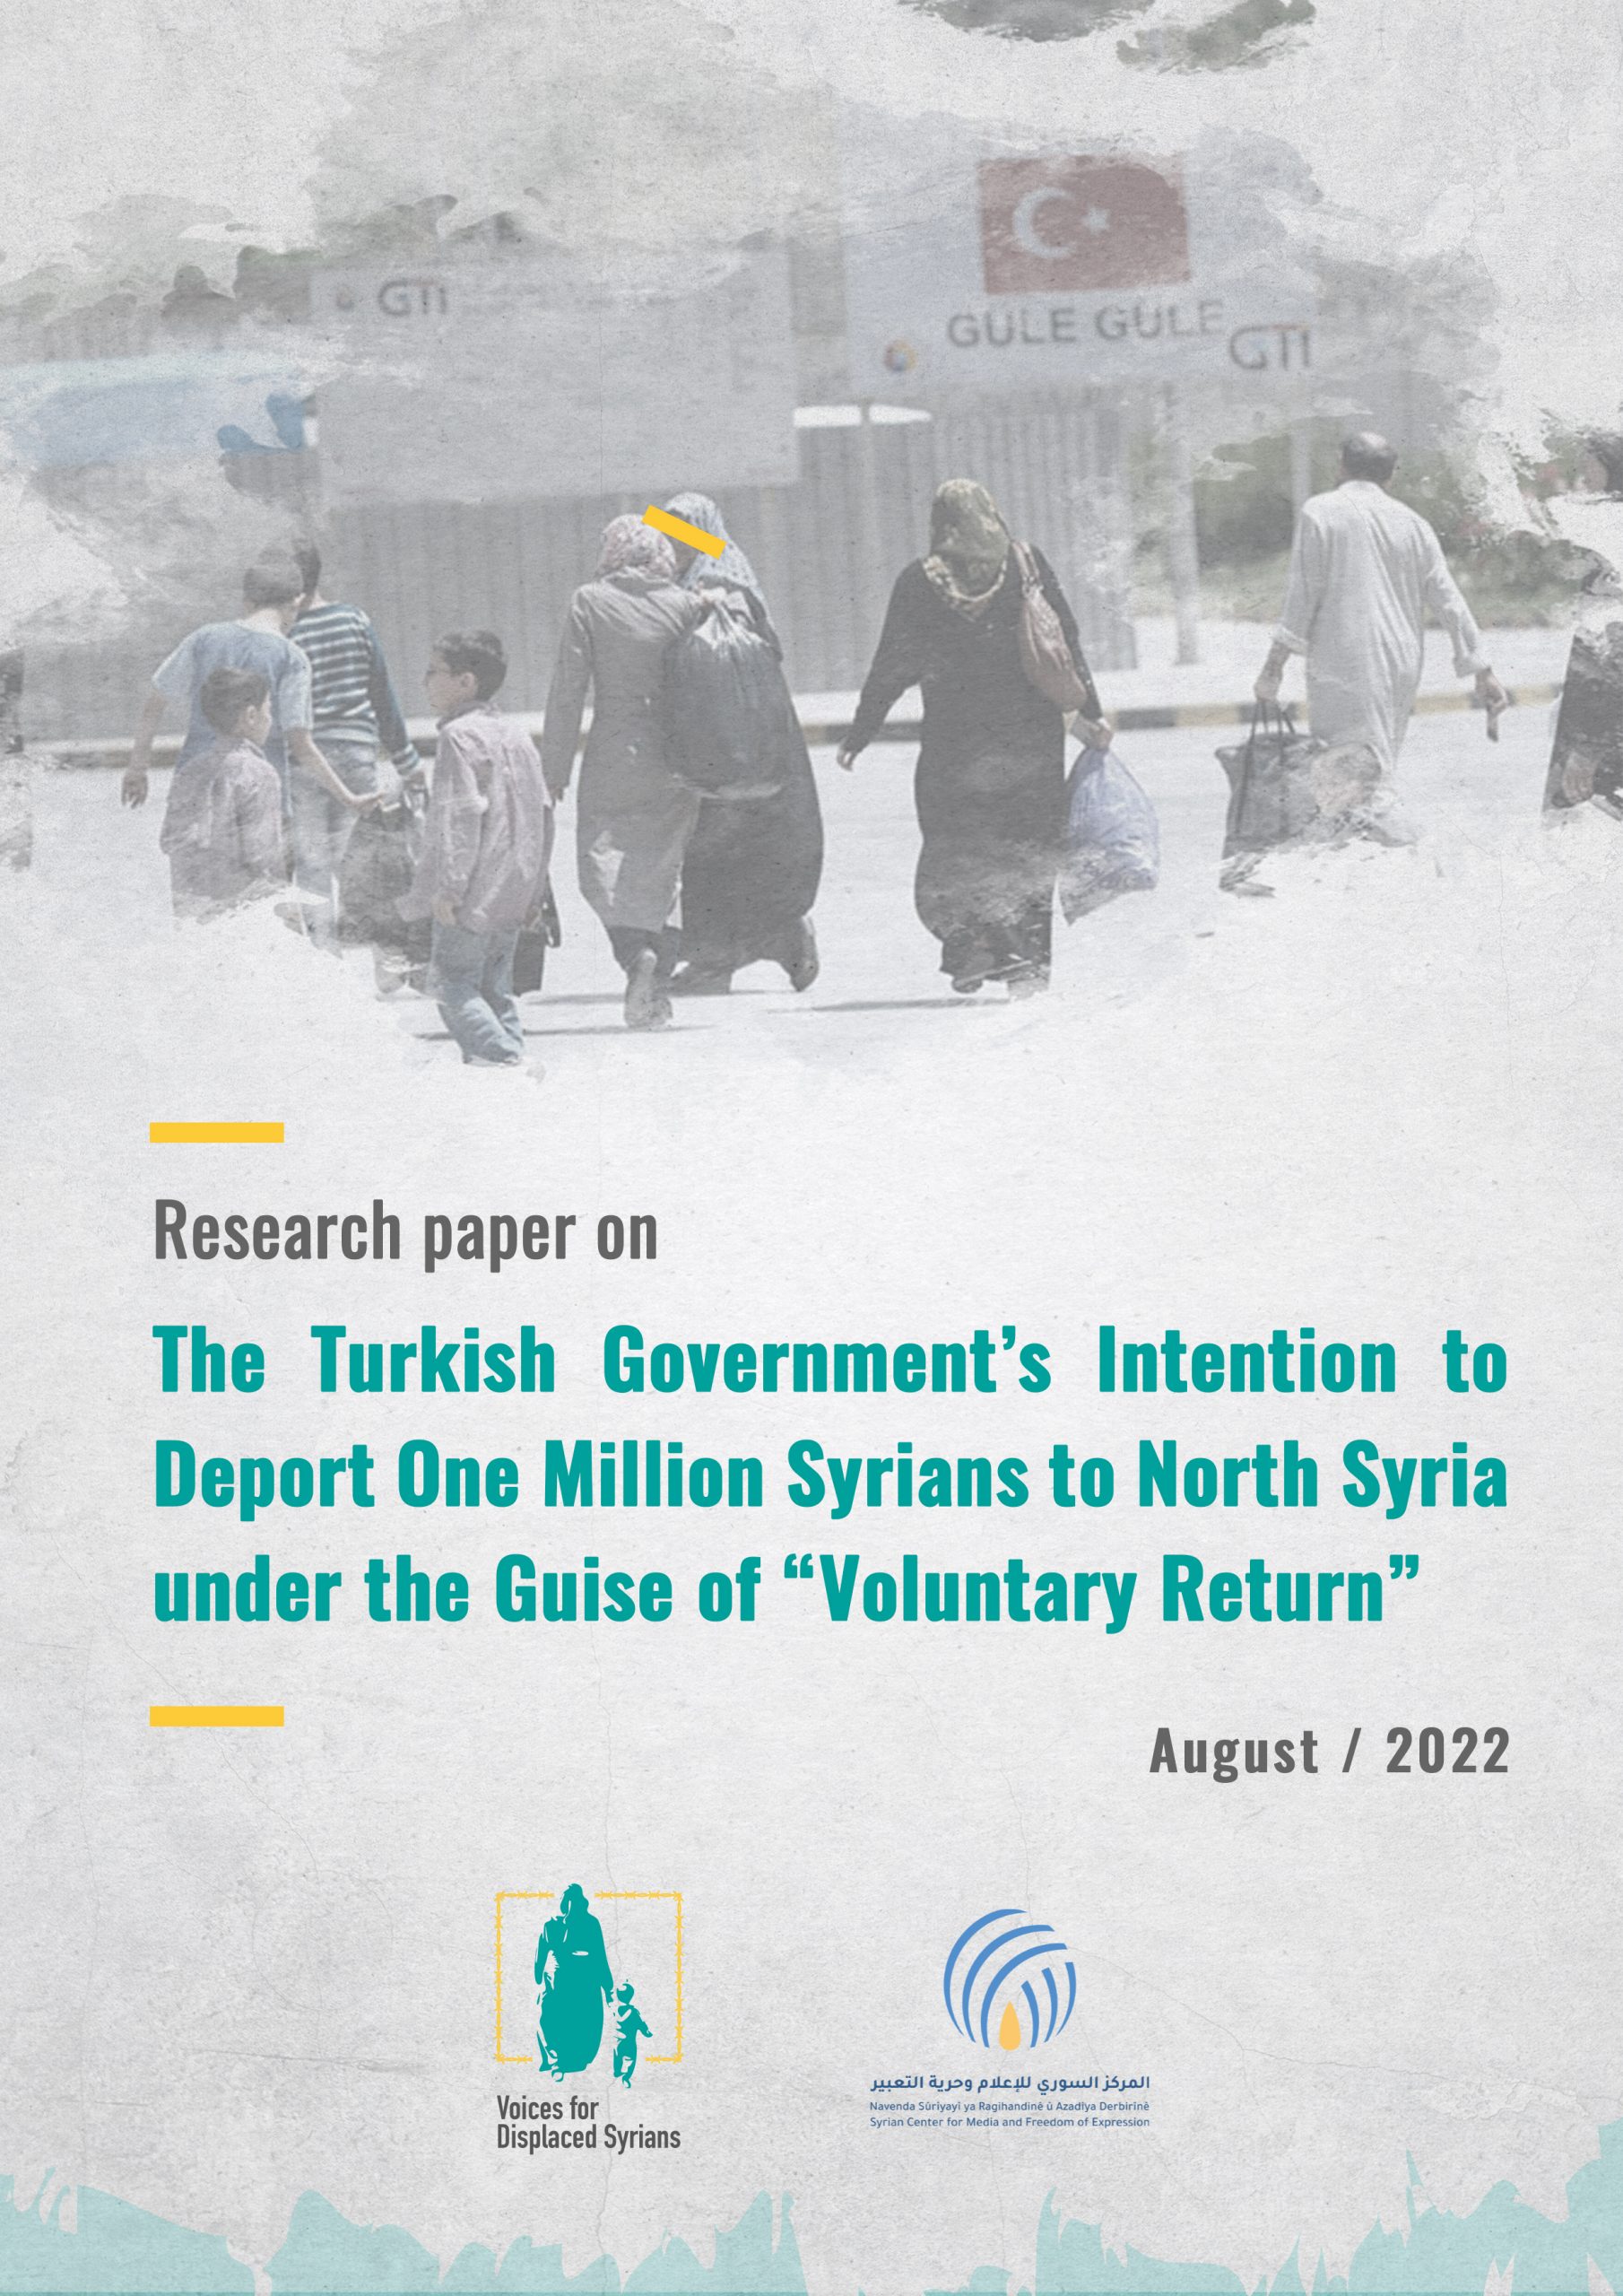 Research paper on the Turkish Government’s Intention to Deport One Million Syrians to North Syria under the Guise of “Voluntary Return”.